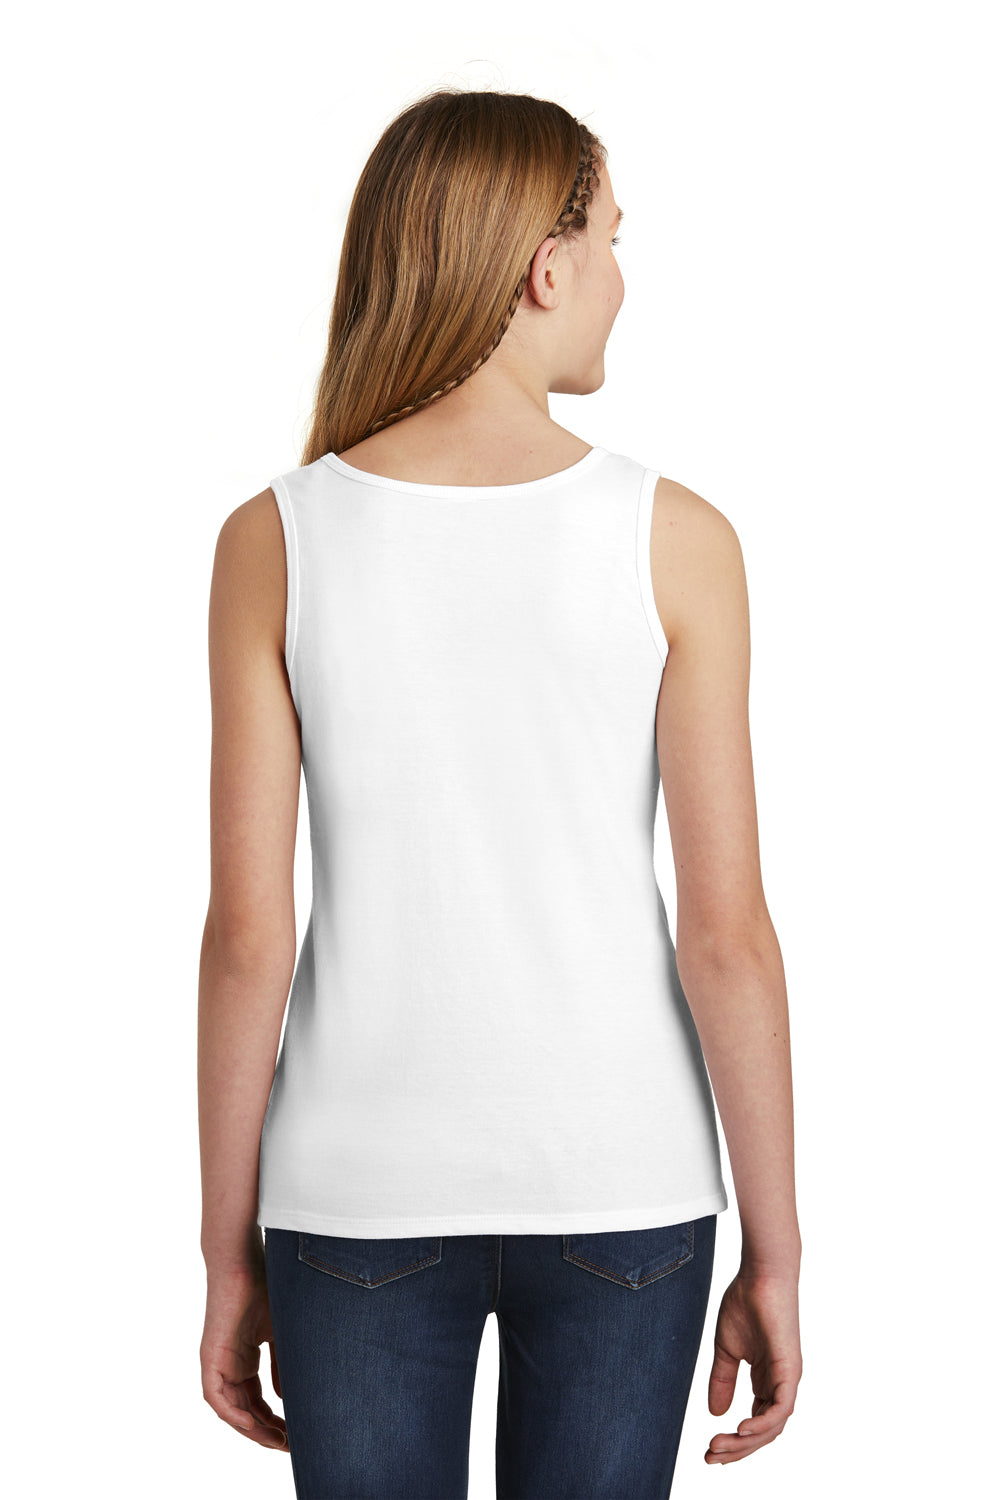 District DT6303YG Youth Very Important Tank Top White Back